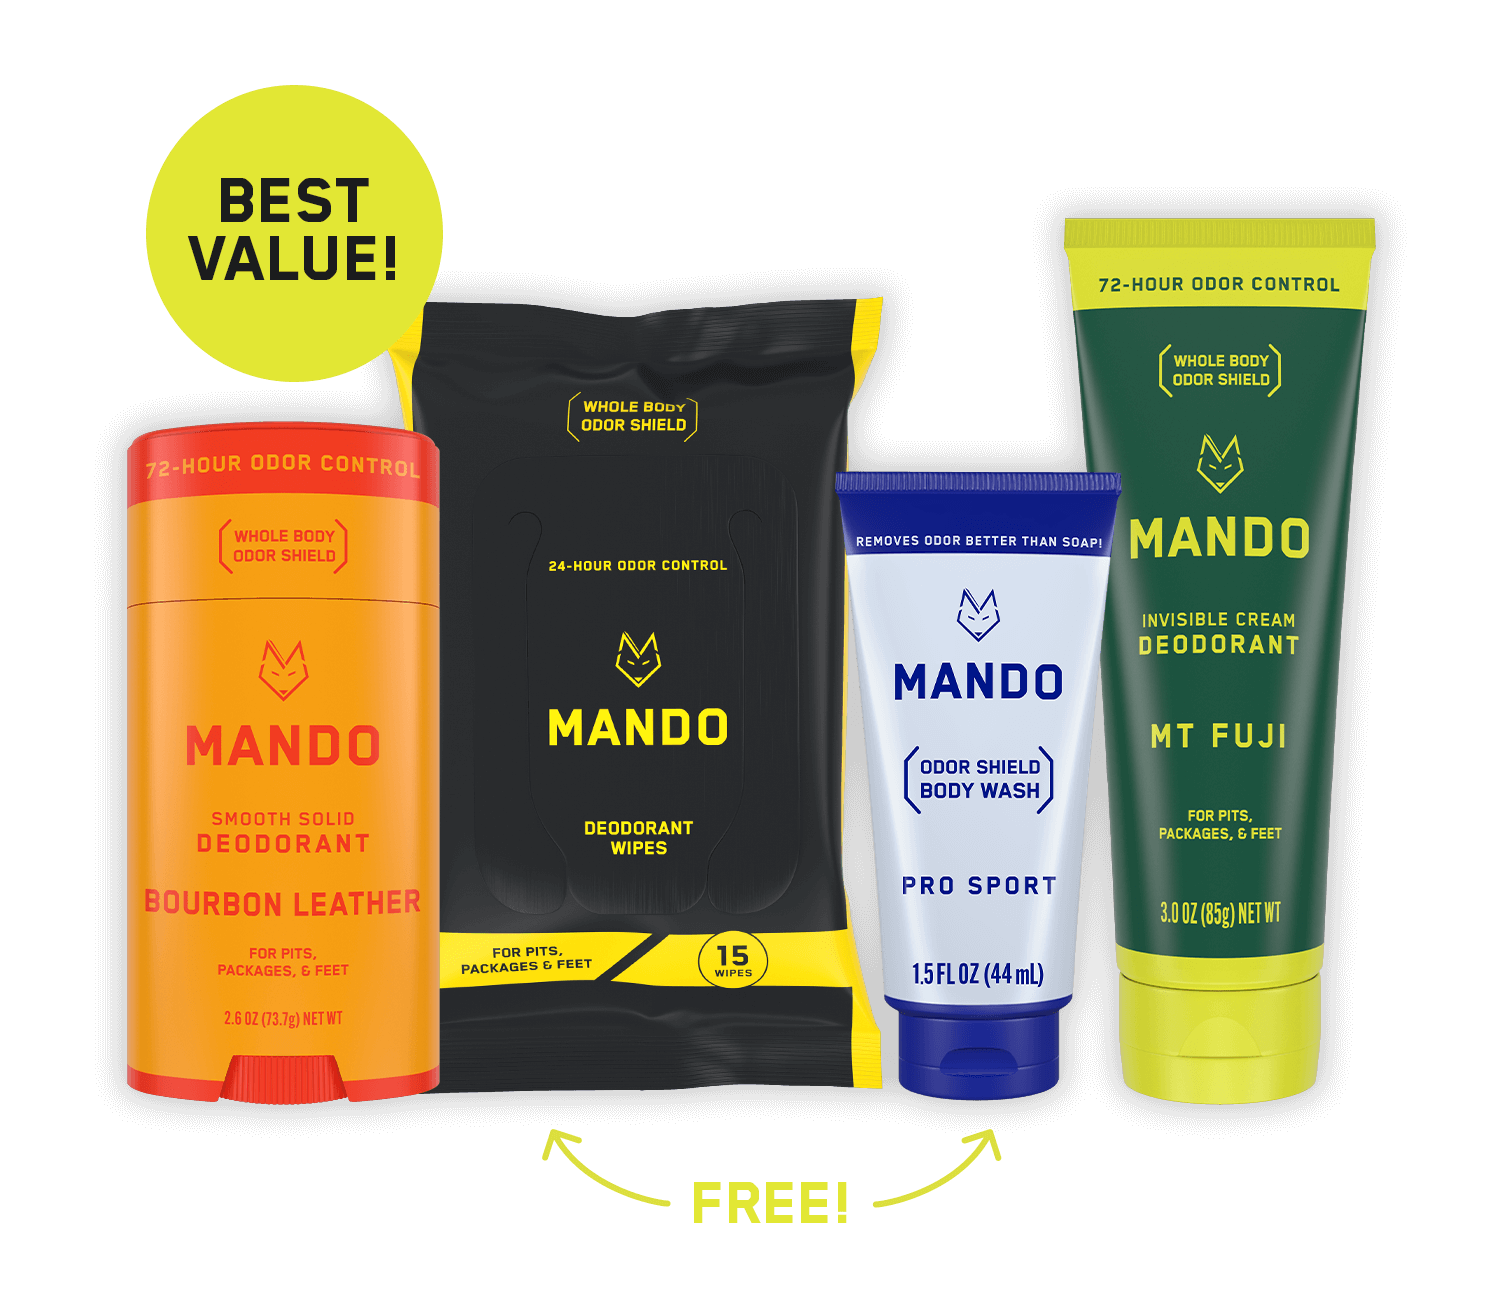 Starter pack of Mando bourbon leather solid deodorant, 15 counts wipes, pro sport mini body wash and Mt. Fuji cream deodorant with best value and free text against a white background 